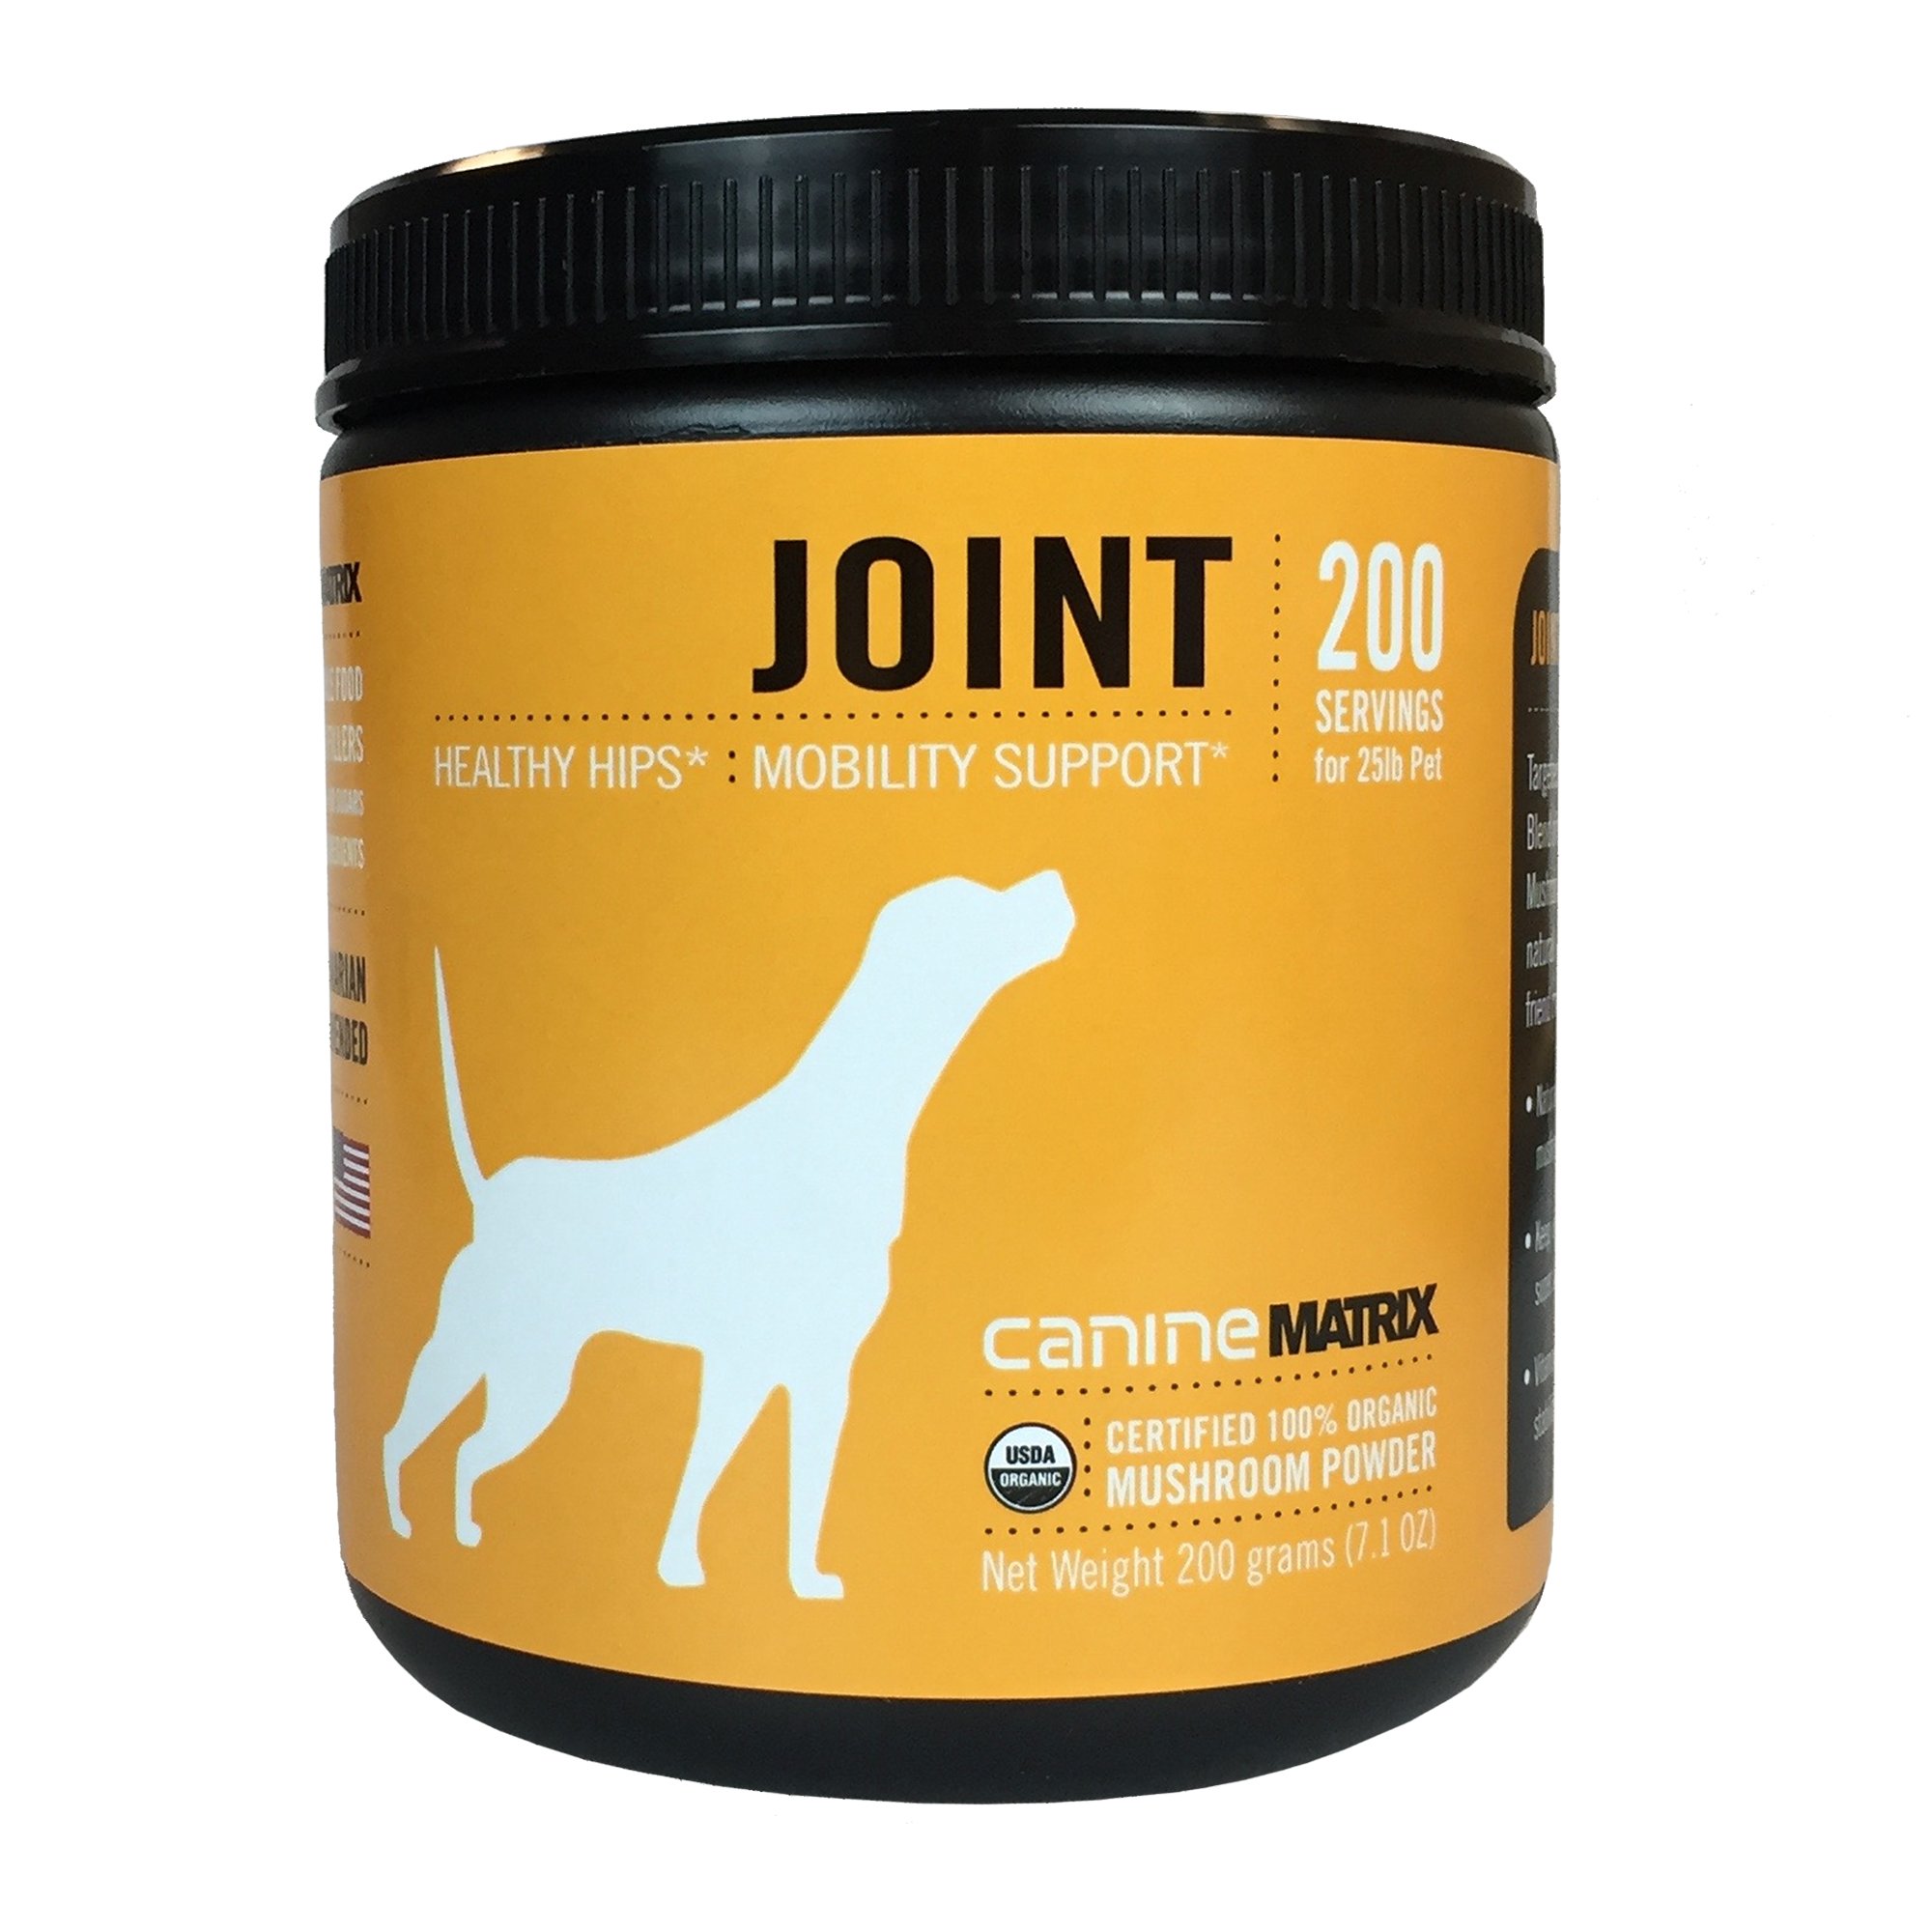 UPC 892392002331 product image for Canine Matrix Joint Supplement for Dogs, 200 grams | upcitemdb.com